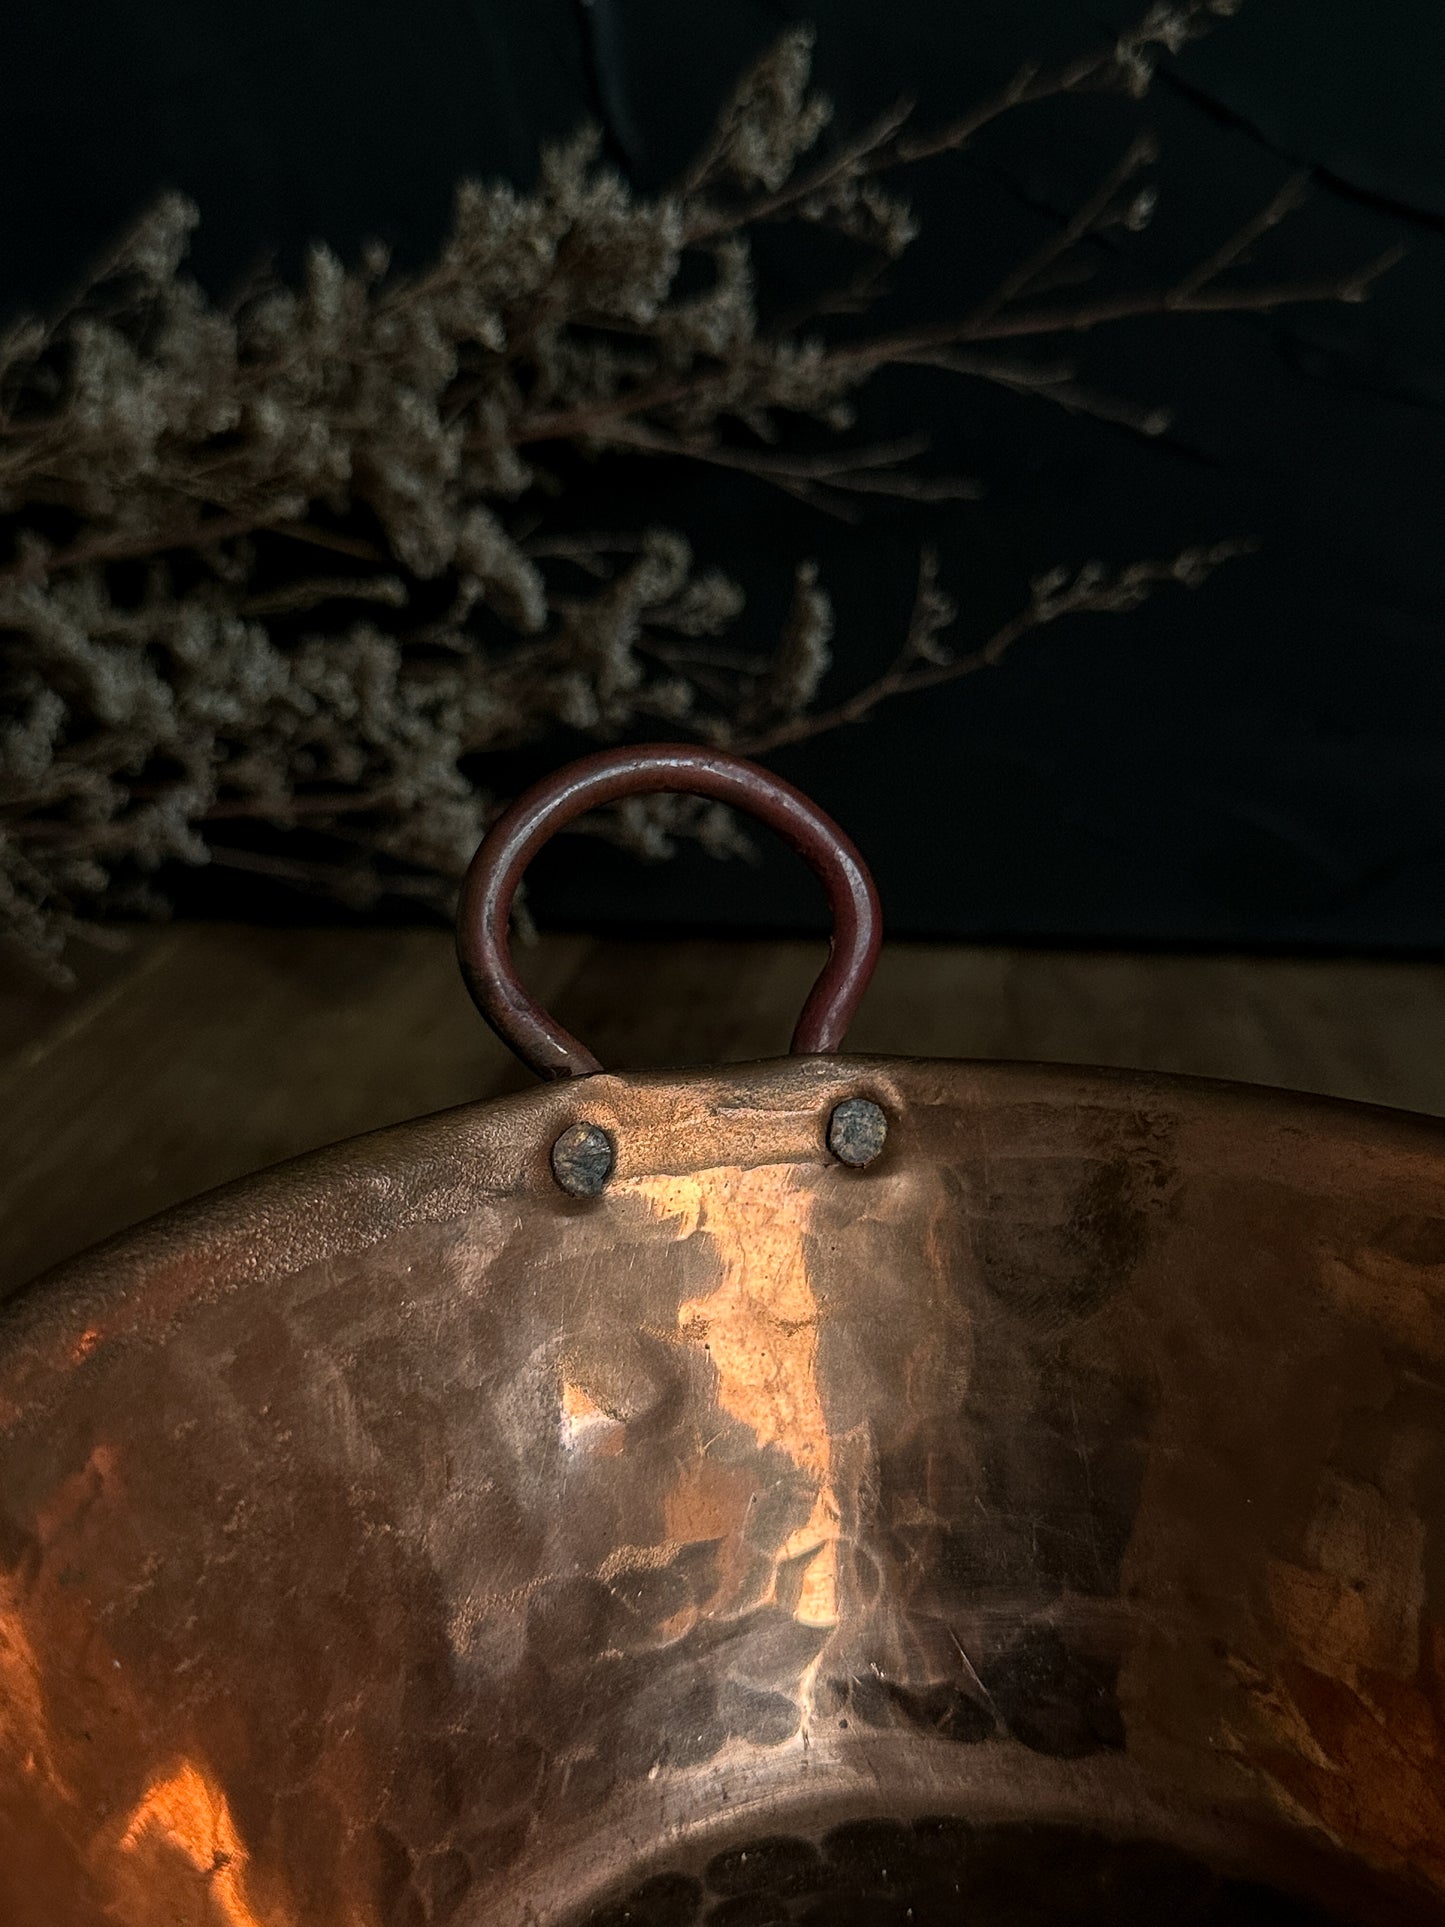 Hammered Copper Bowl with Riveted Copper Handles